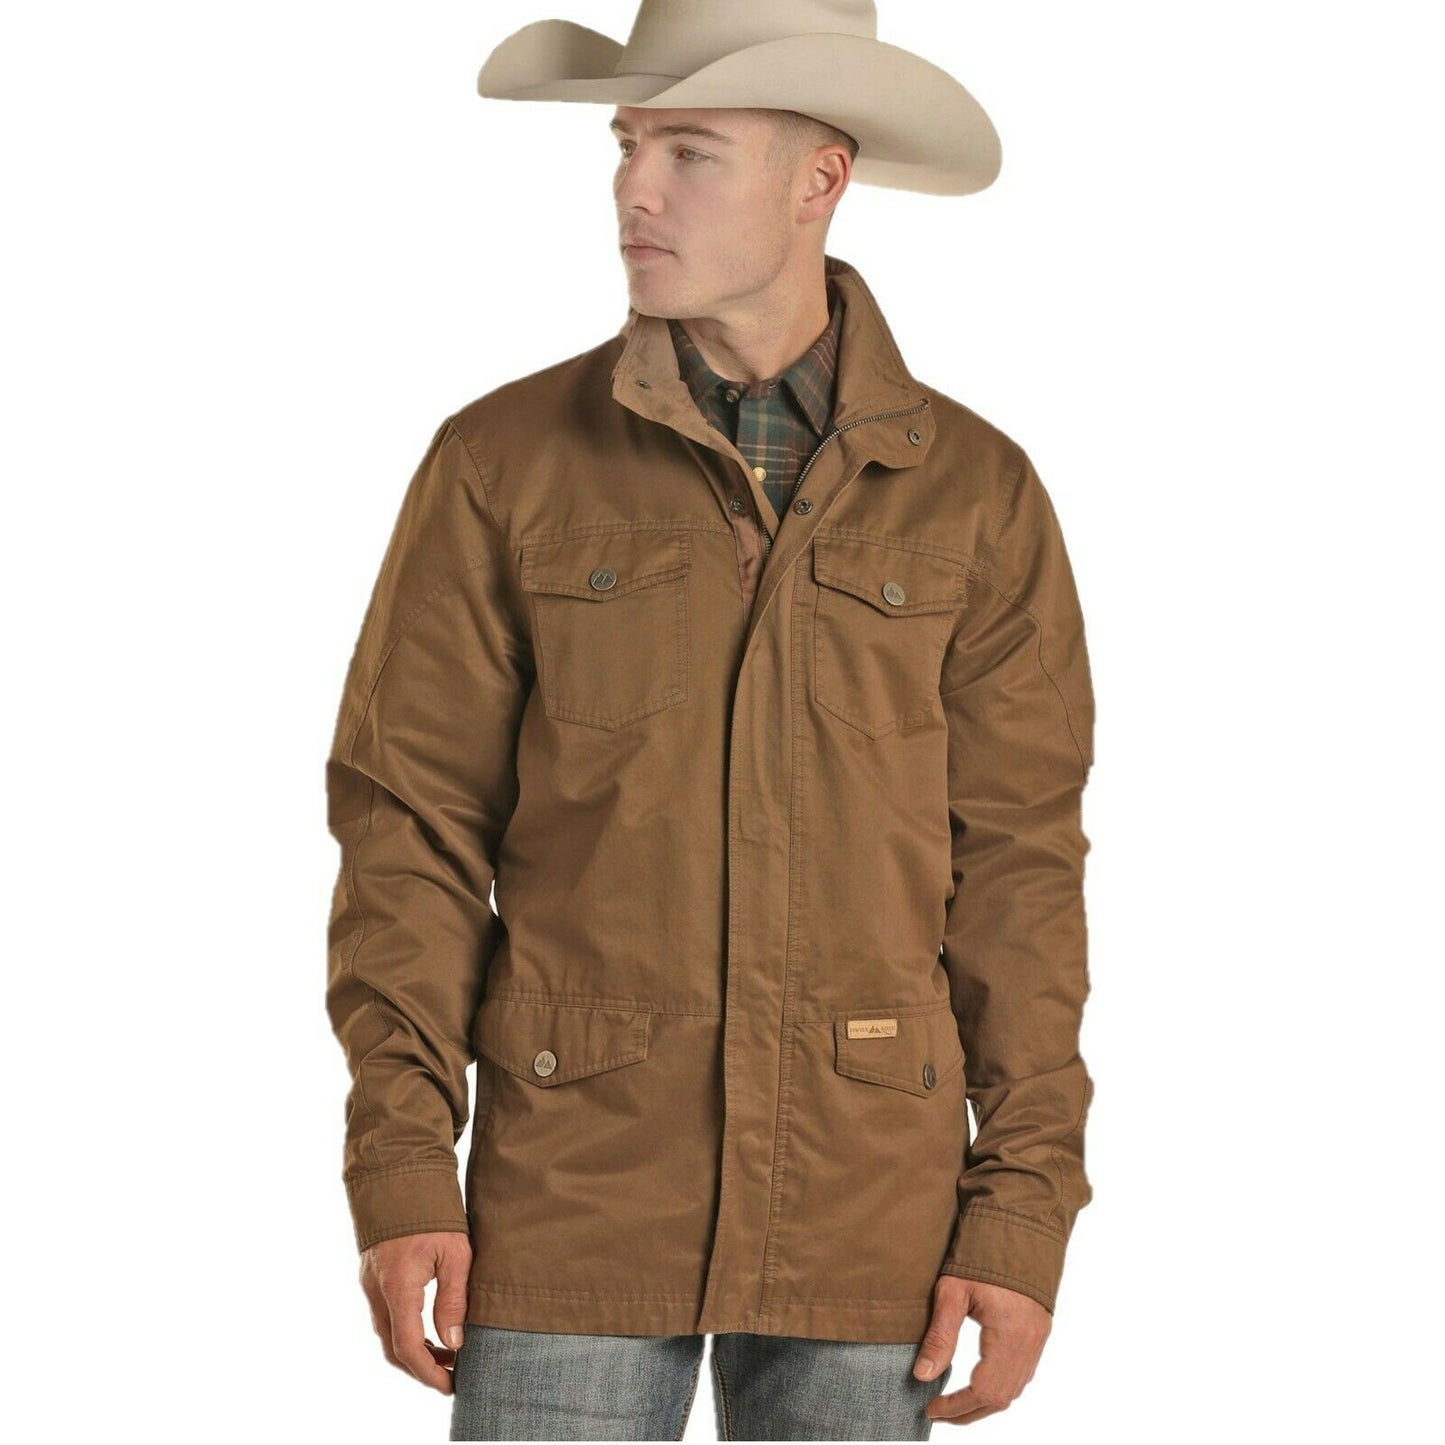 Powder River Outfitters Men's Rancher Brown Jacket 92-6755-25